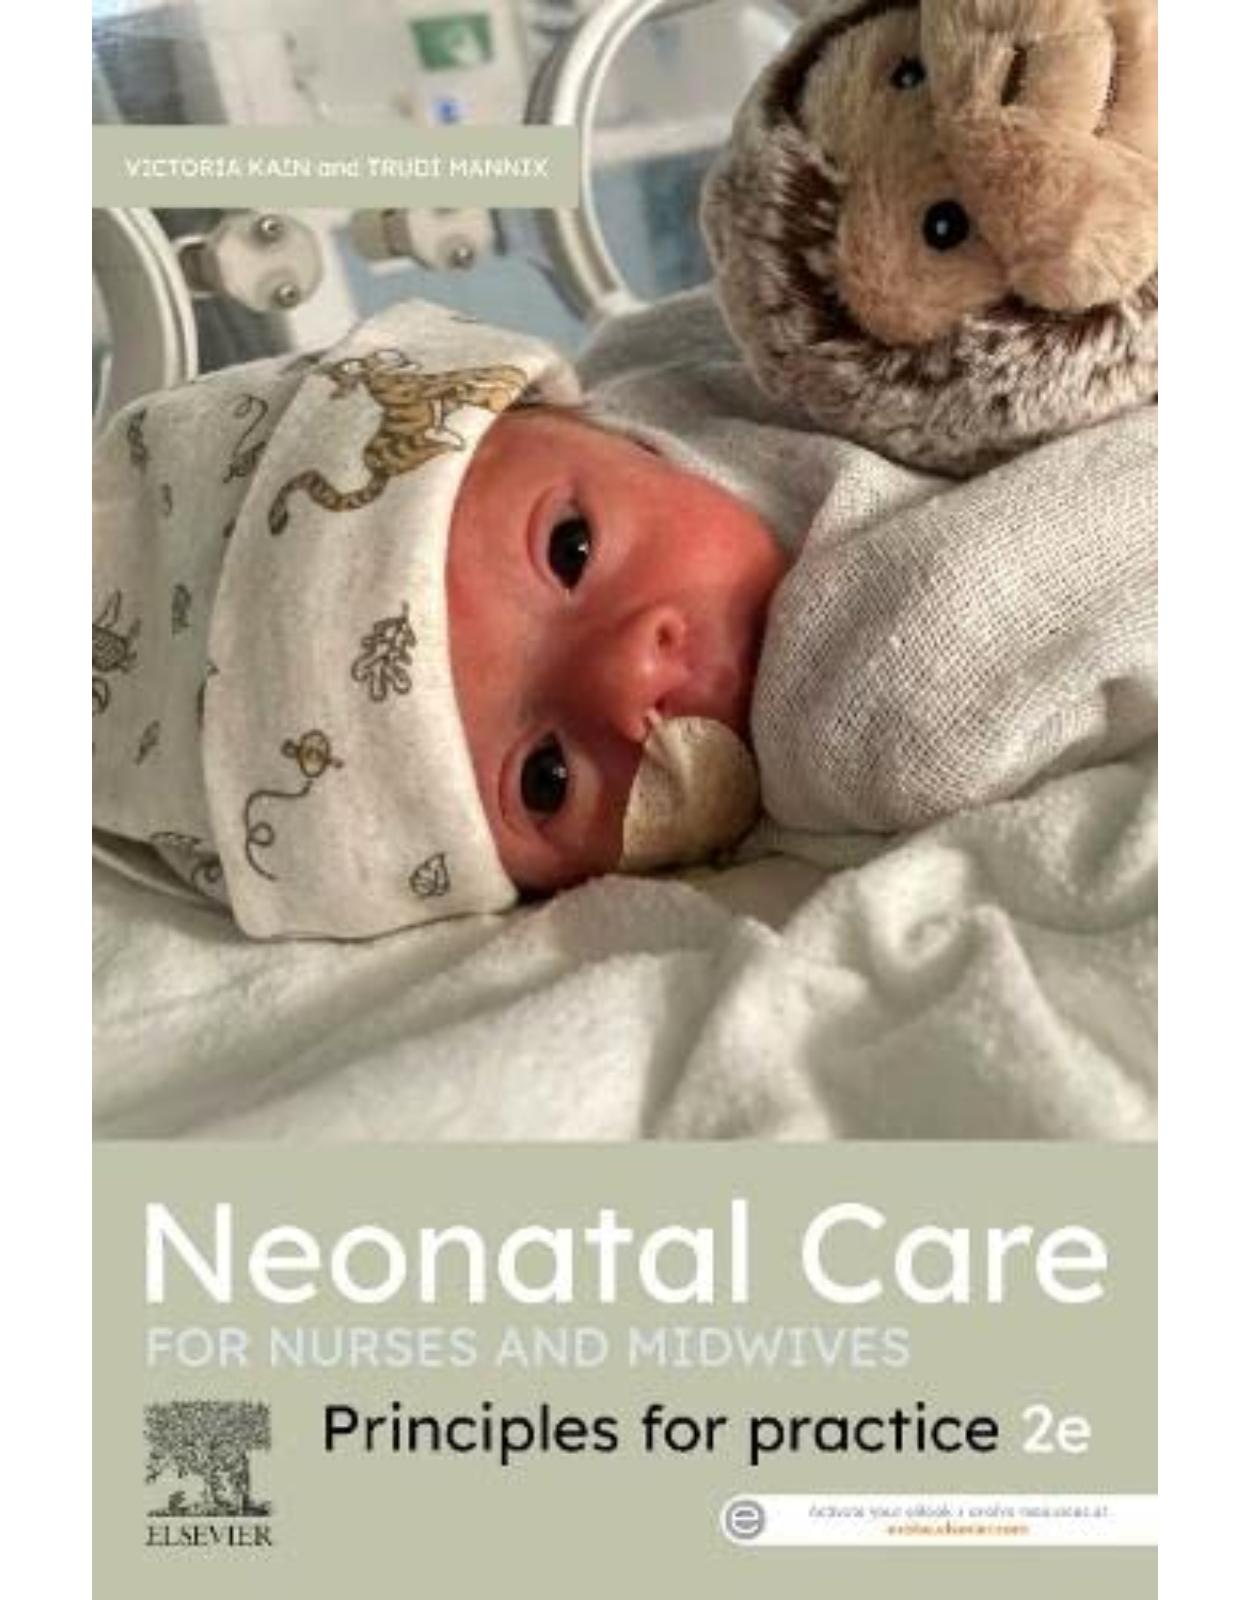 Neonatal Care for Nurses and Midwives: Principles for Practice